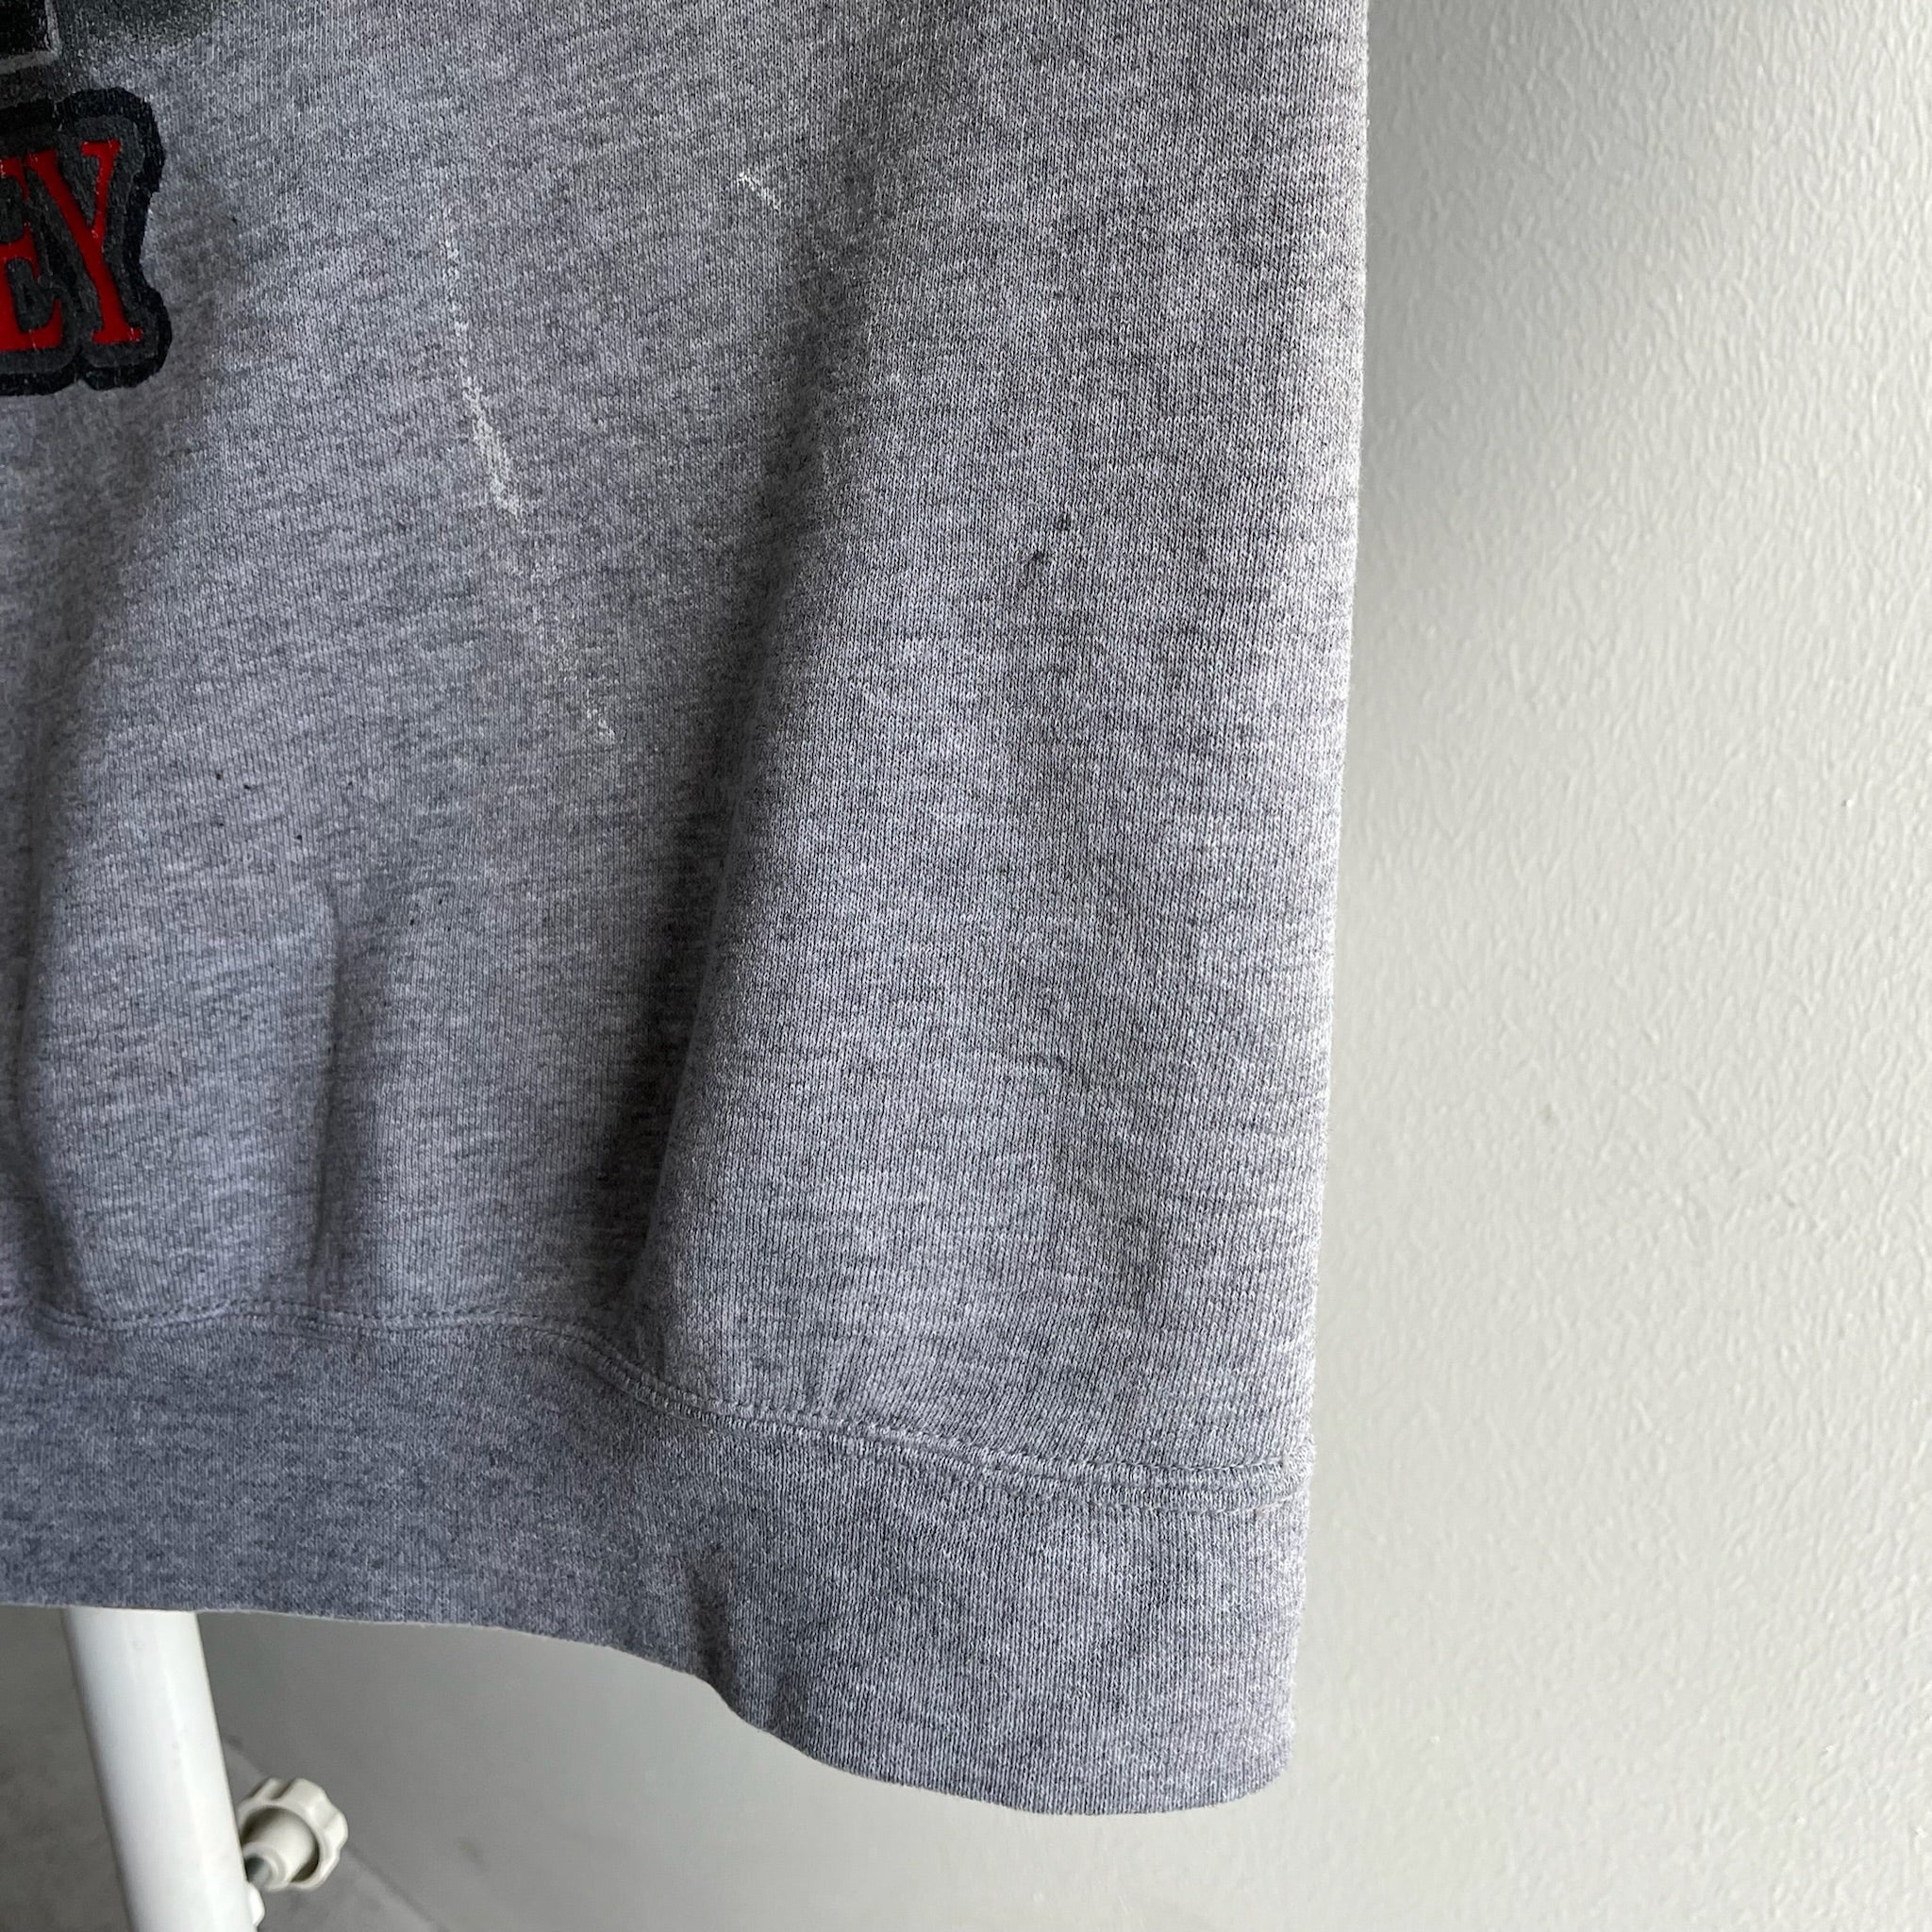 1990s Mickey Paint Stained Sweatshirt